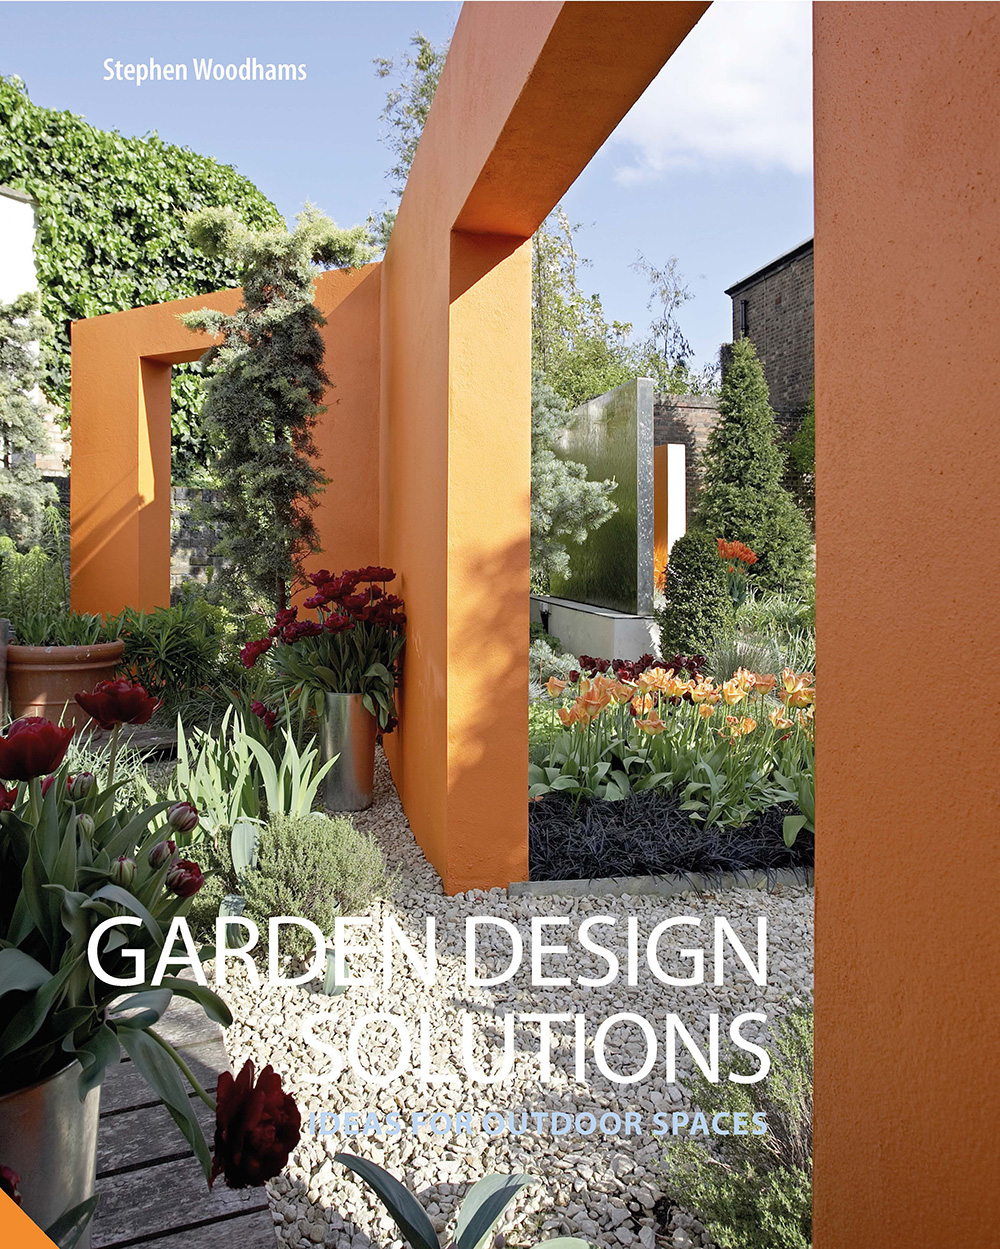 ‘Garden Design Solutions’ by Stephen Woodhams- book review by MiaFleur